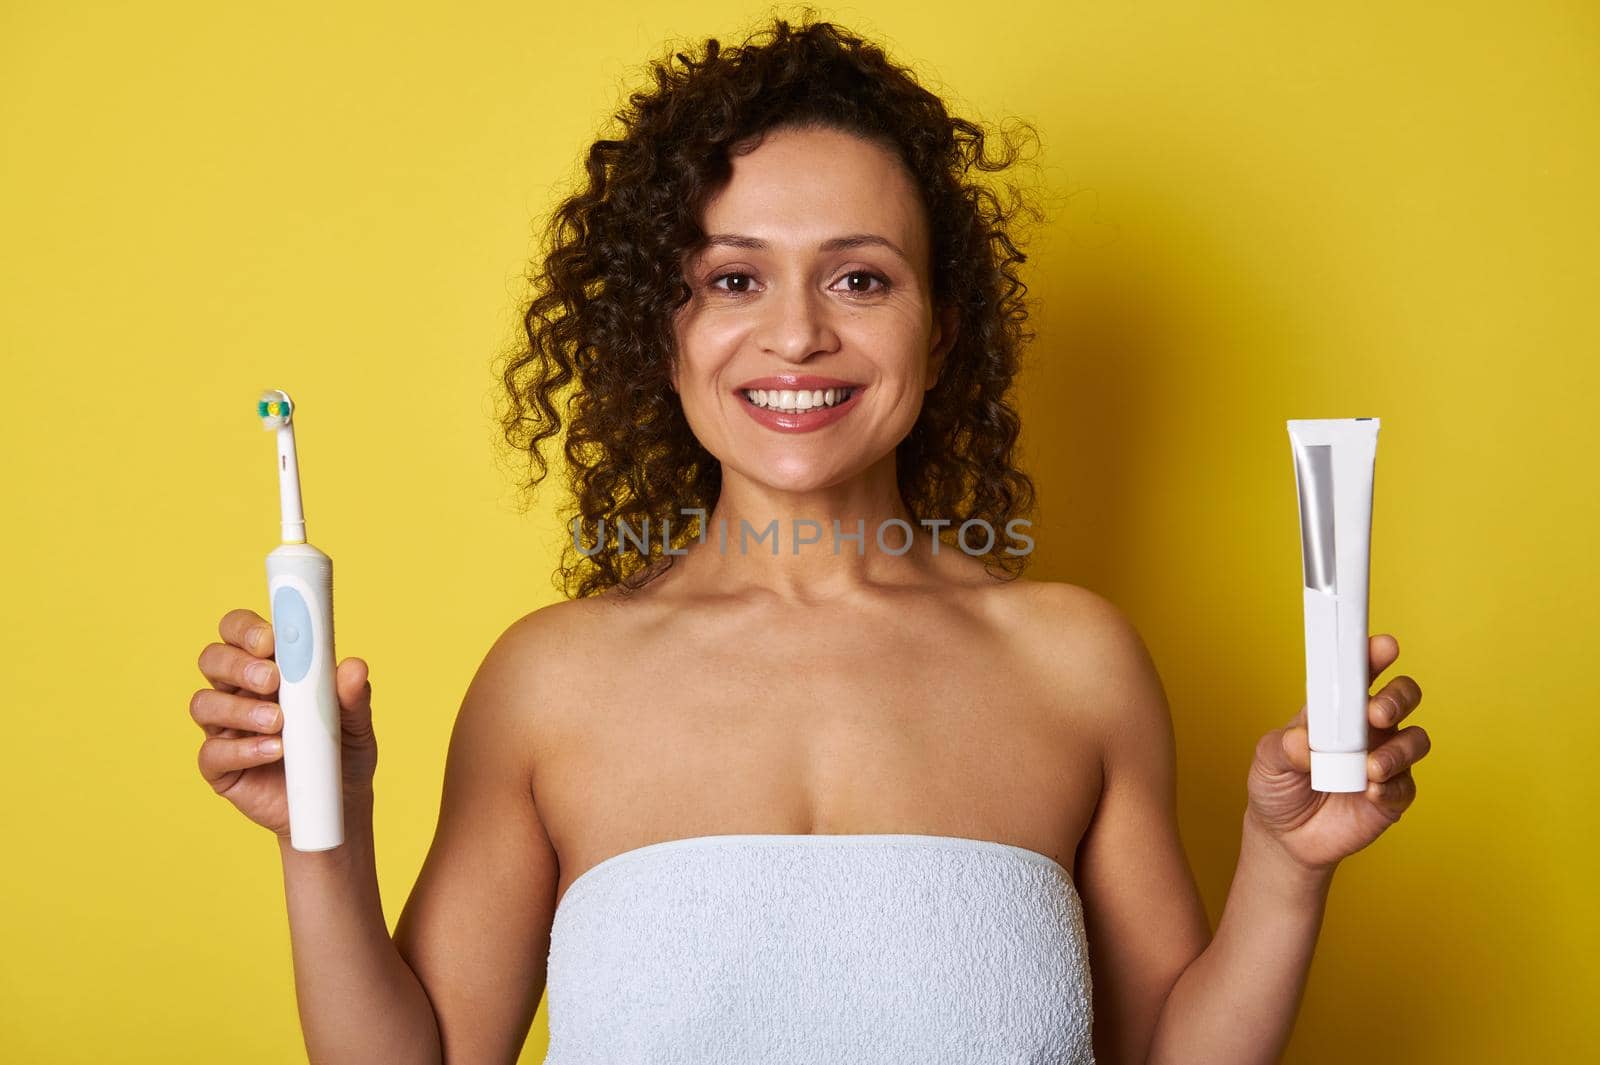 Beautiful half naked woman wrapped in a white bath towel holding a toothpaste in one hand and an electric toothbrush in the other hand and looking at the camera with toothy smile